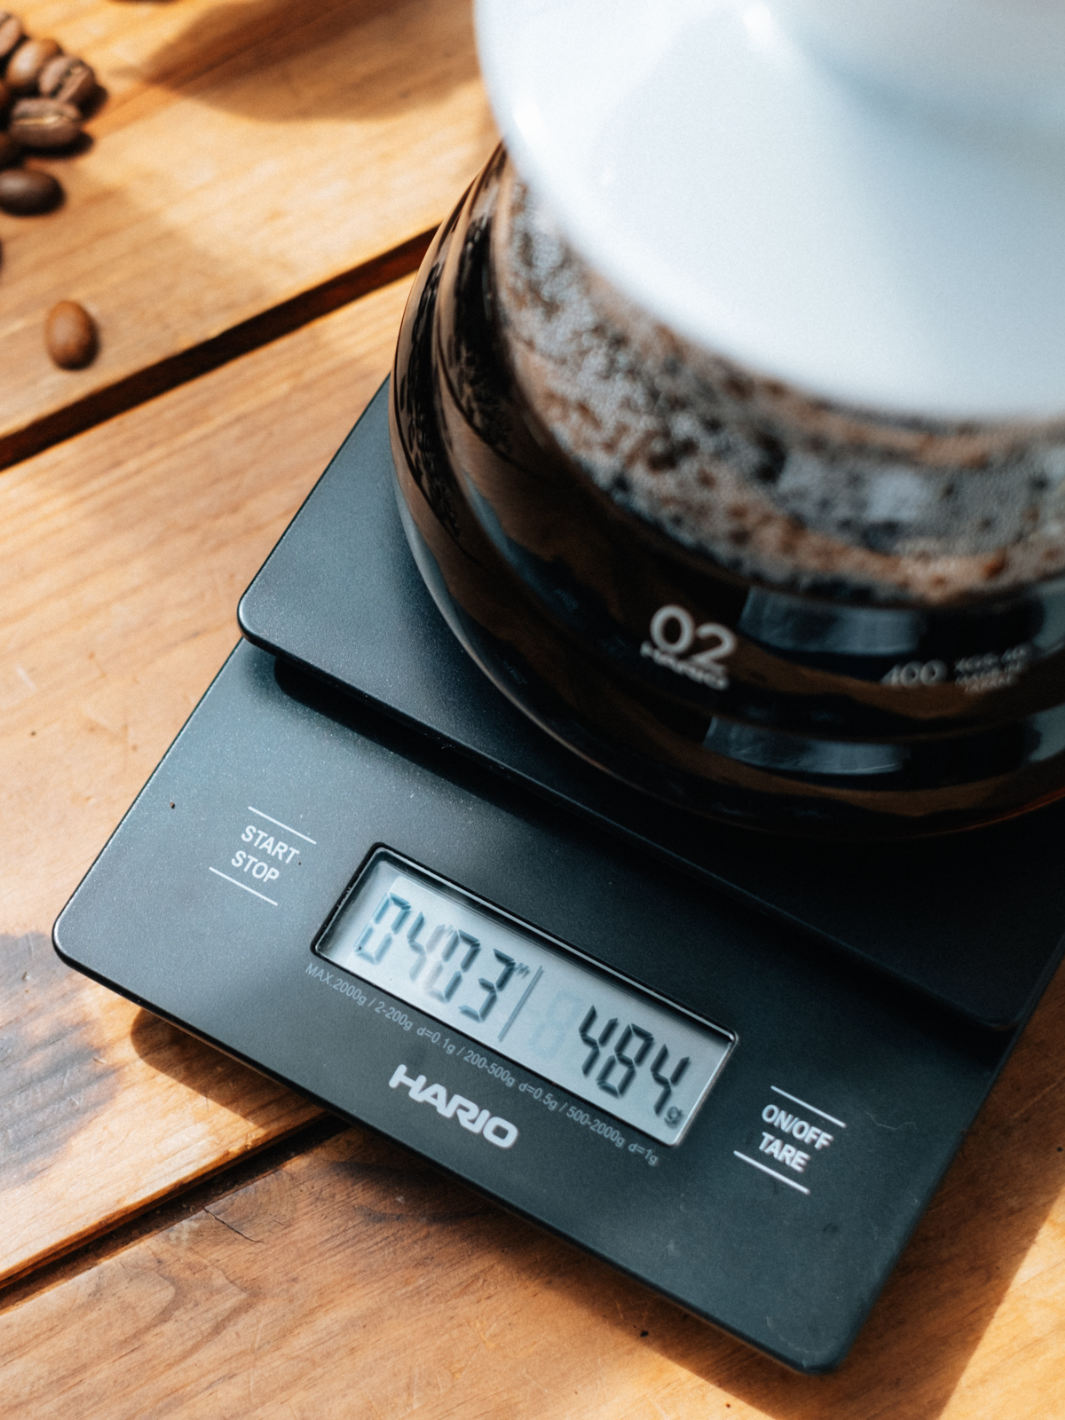 Hario Scale - Hario V60 Drip Scale and Timer